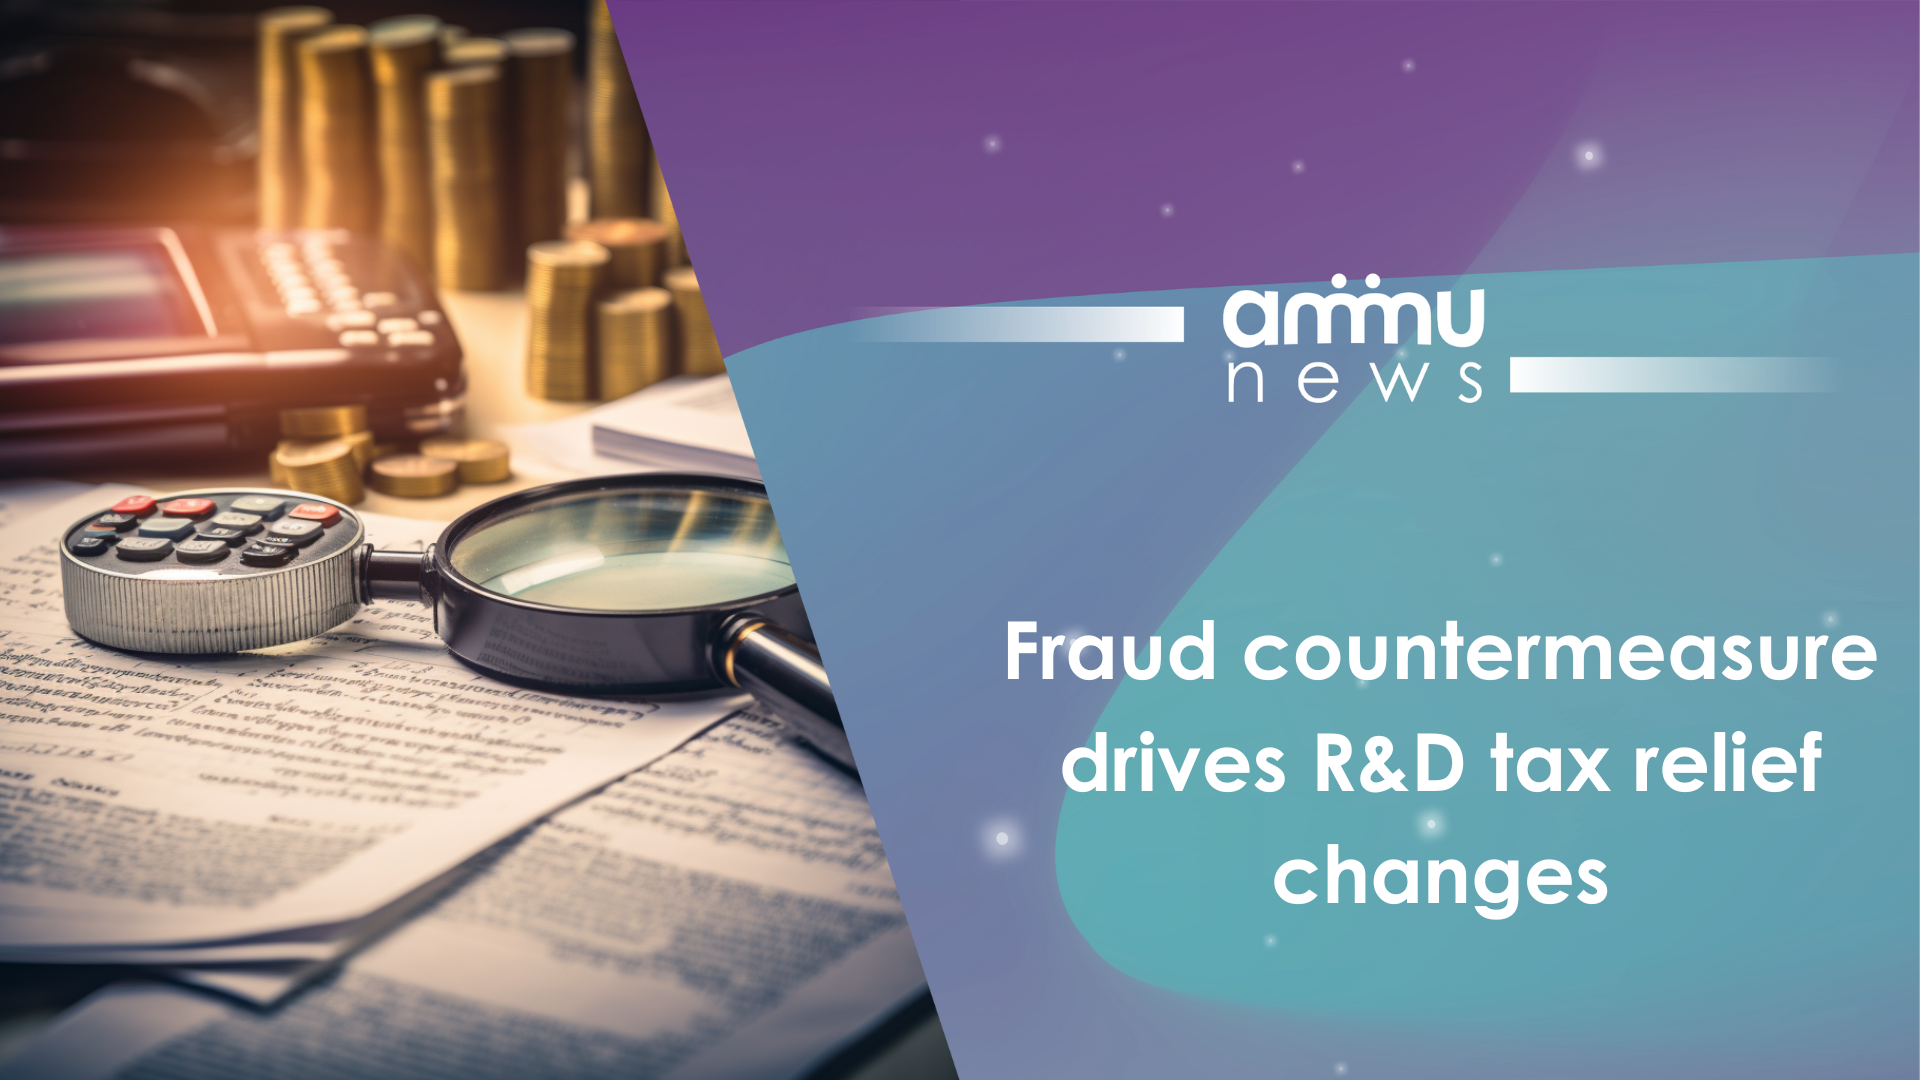 Fraud countermeasure drives R&D tax relief changes